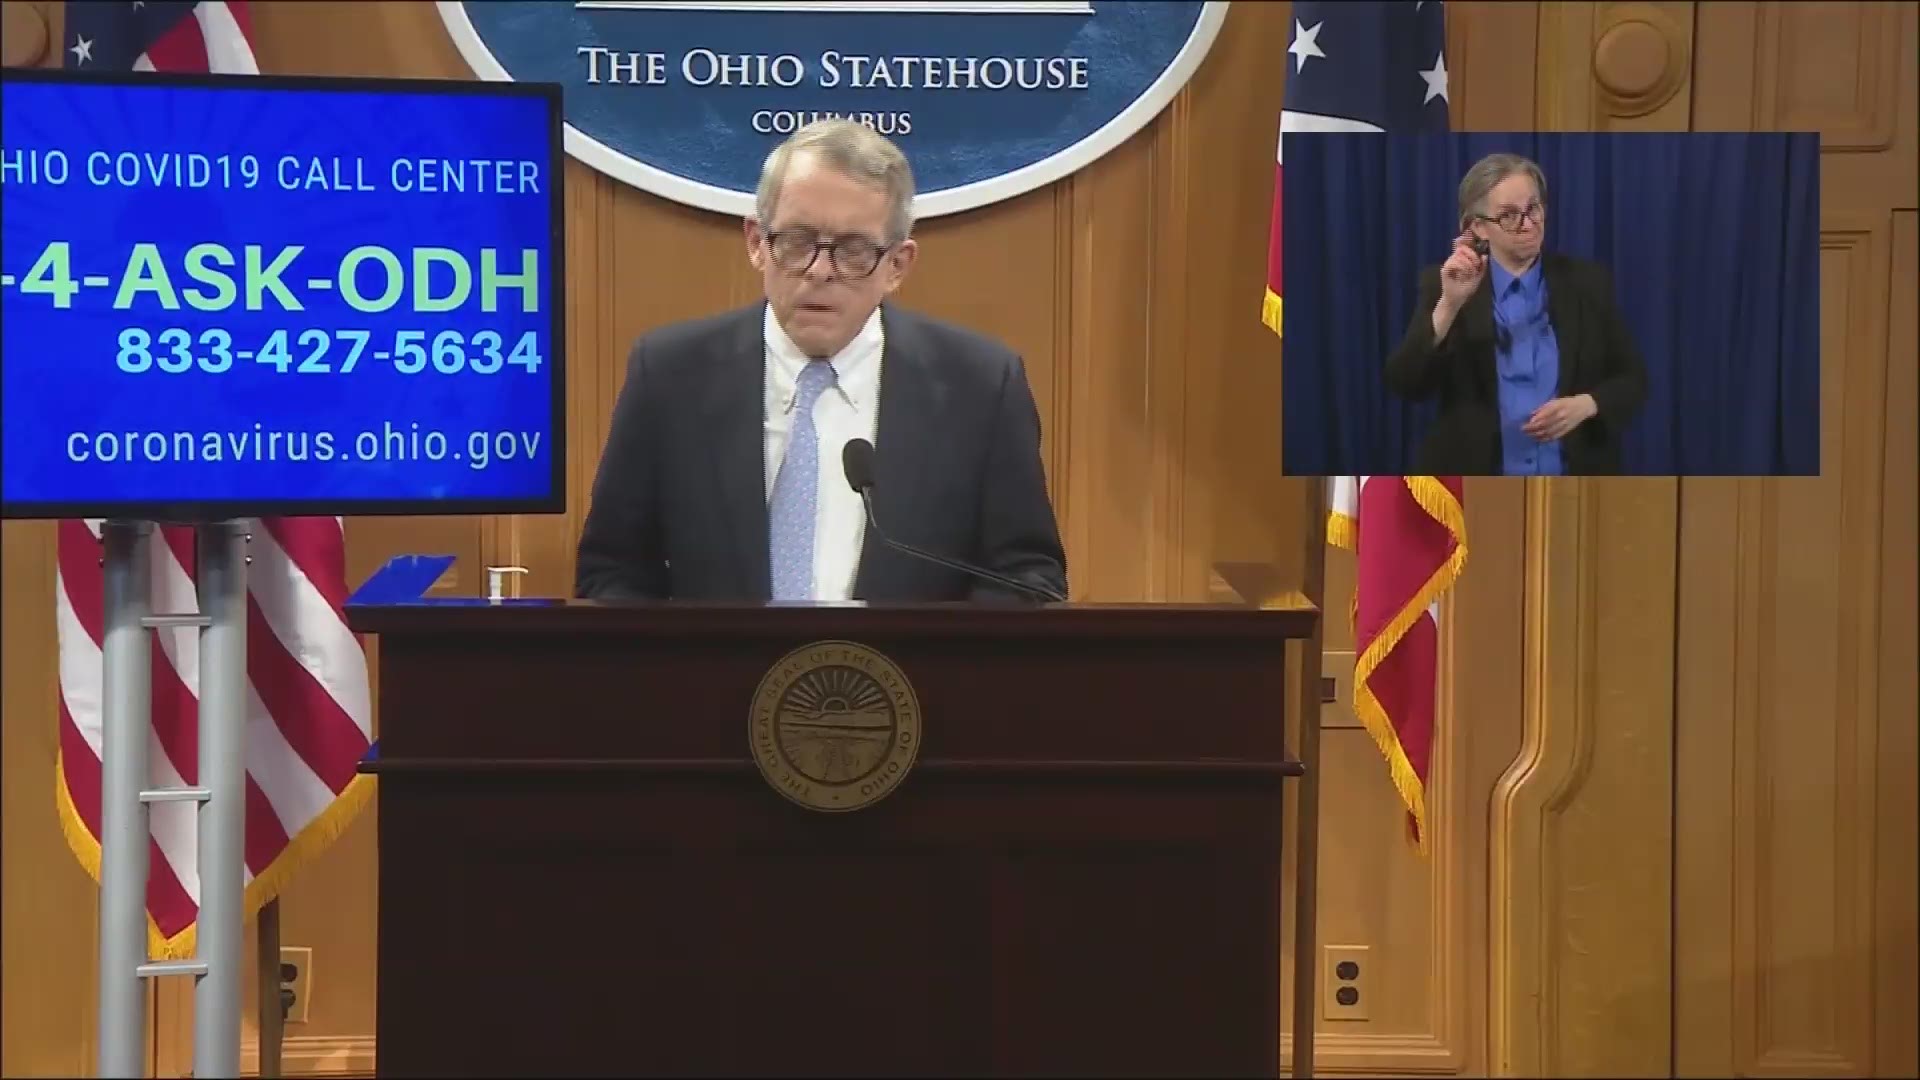 On Thursday, Ohio Governor Mike DeWine said that the state is at the 'end of the beginning' of its fight with the coronavirus.